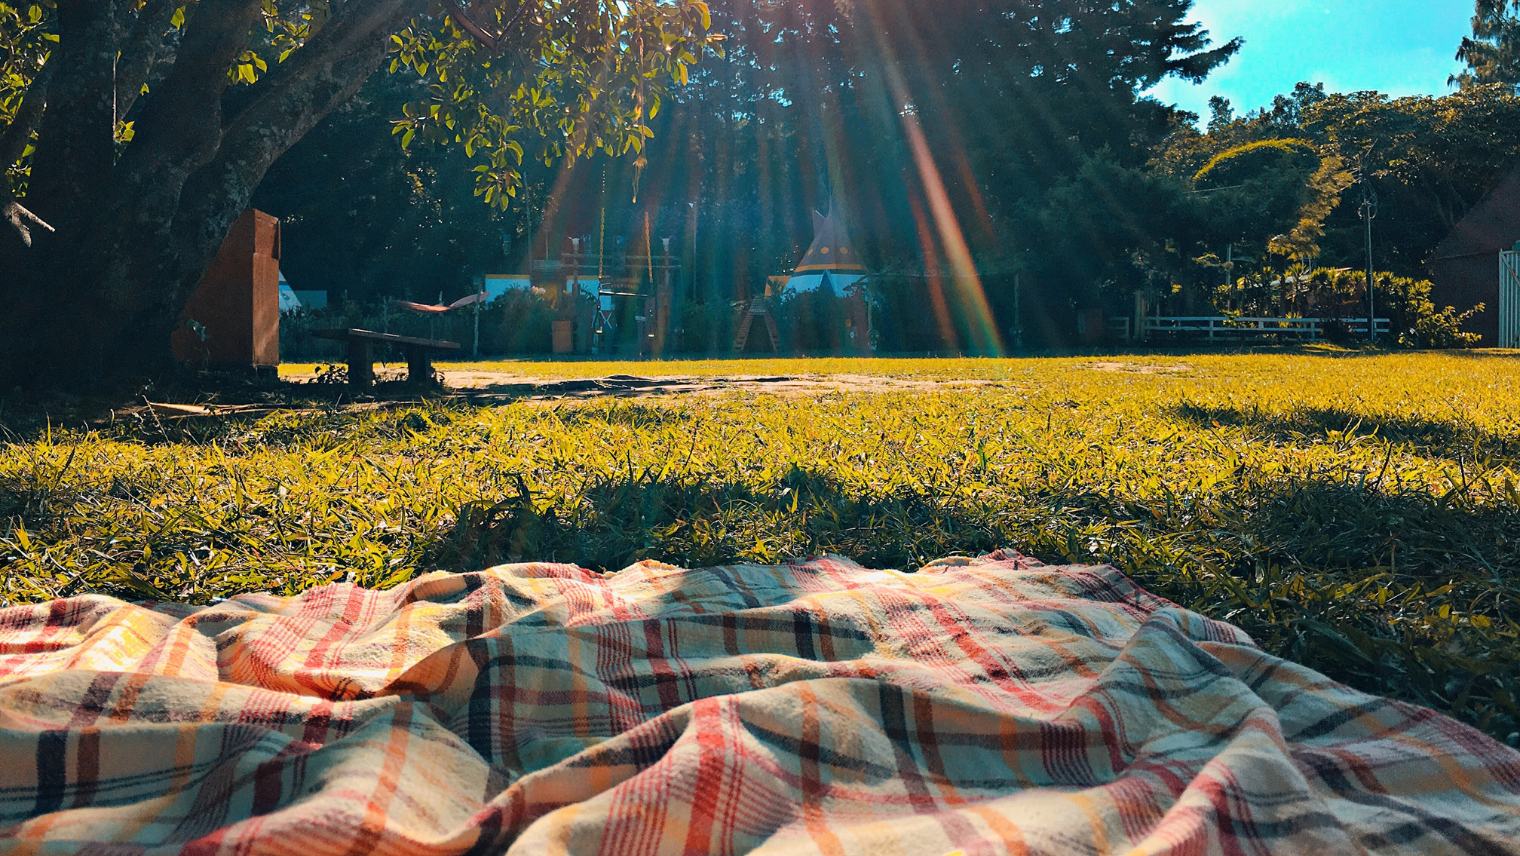 A blanket on the grass in a park